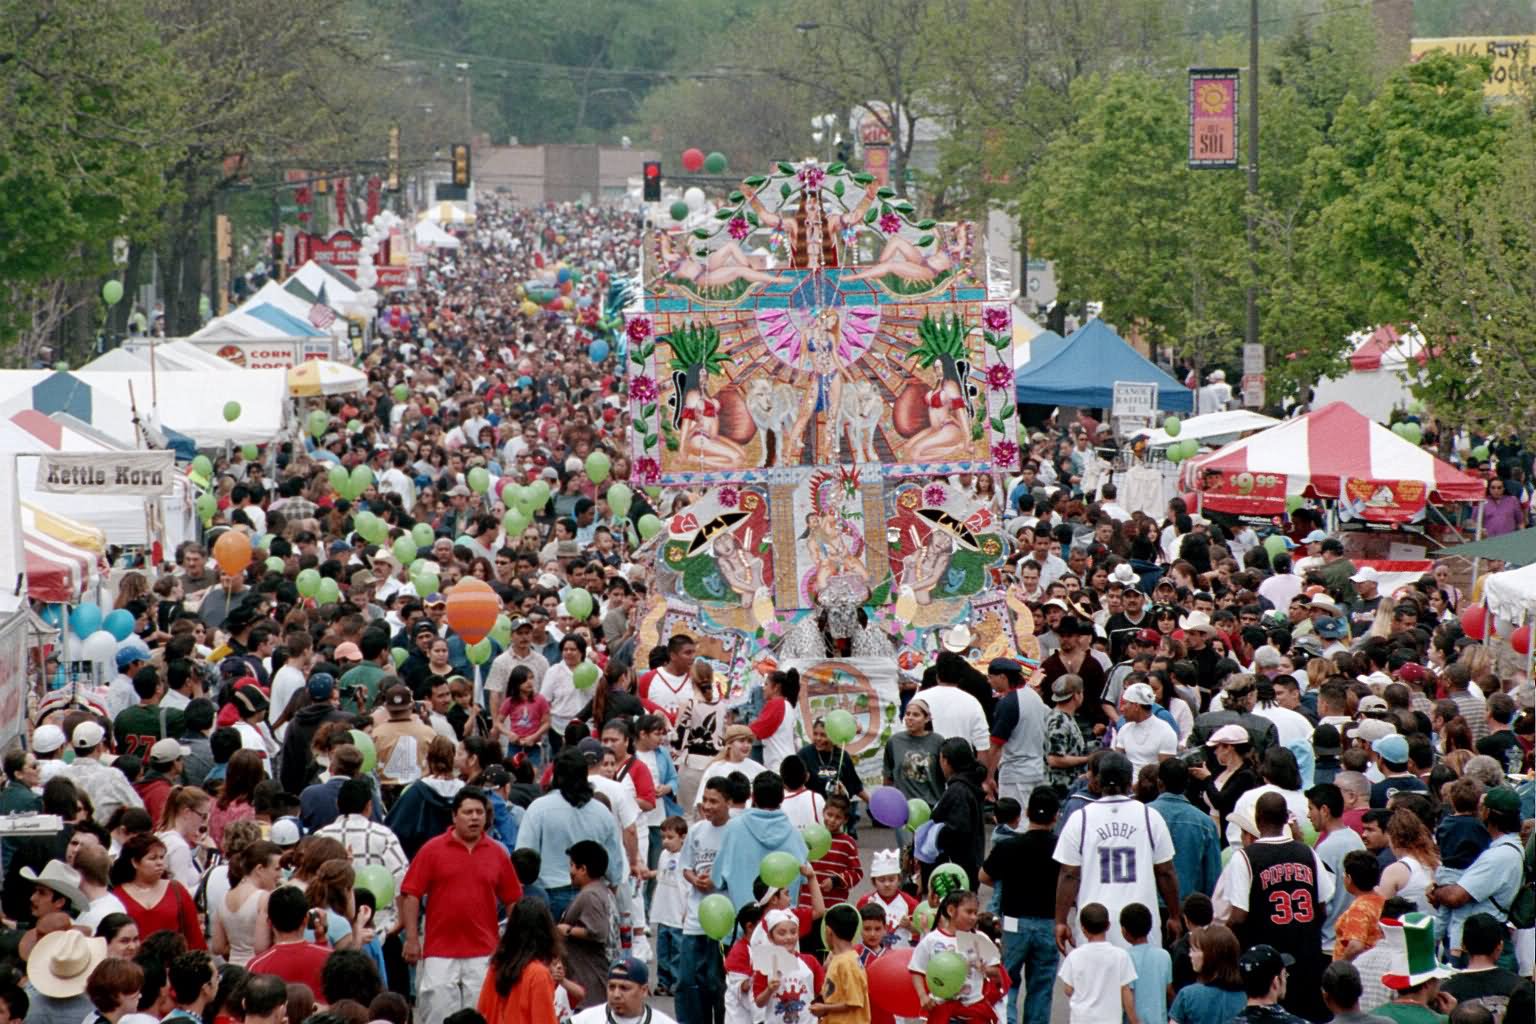 Large Number Of People Get Together To Celebrate Cinco de Mayo